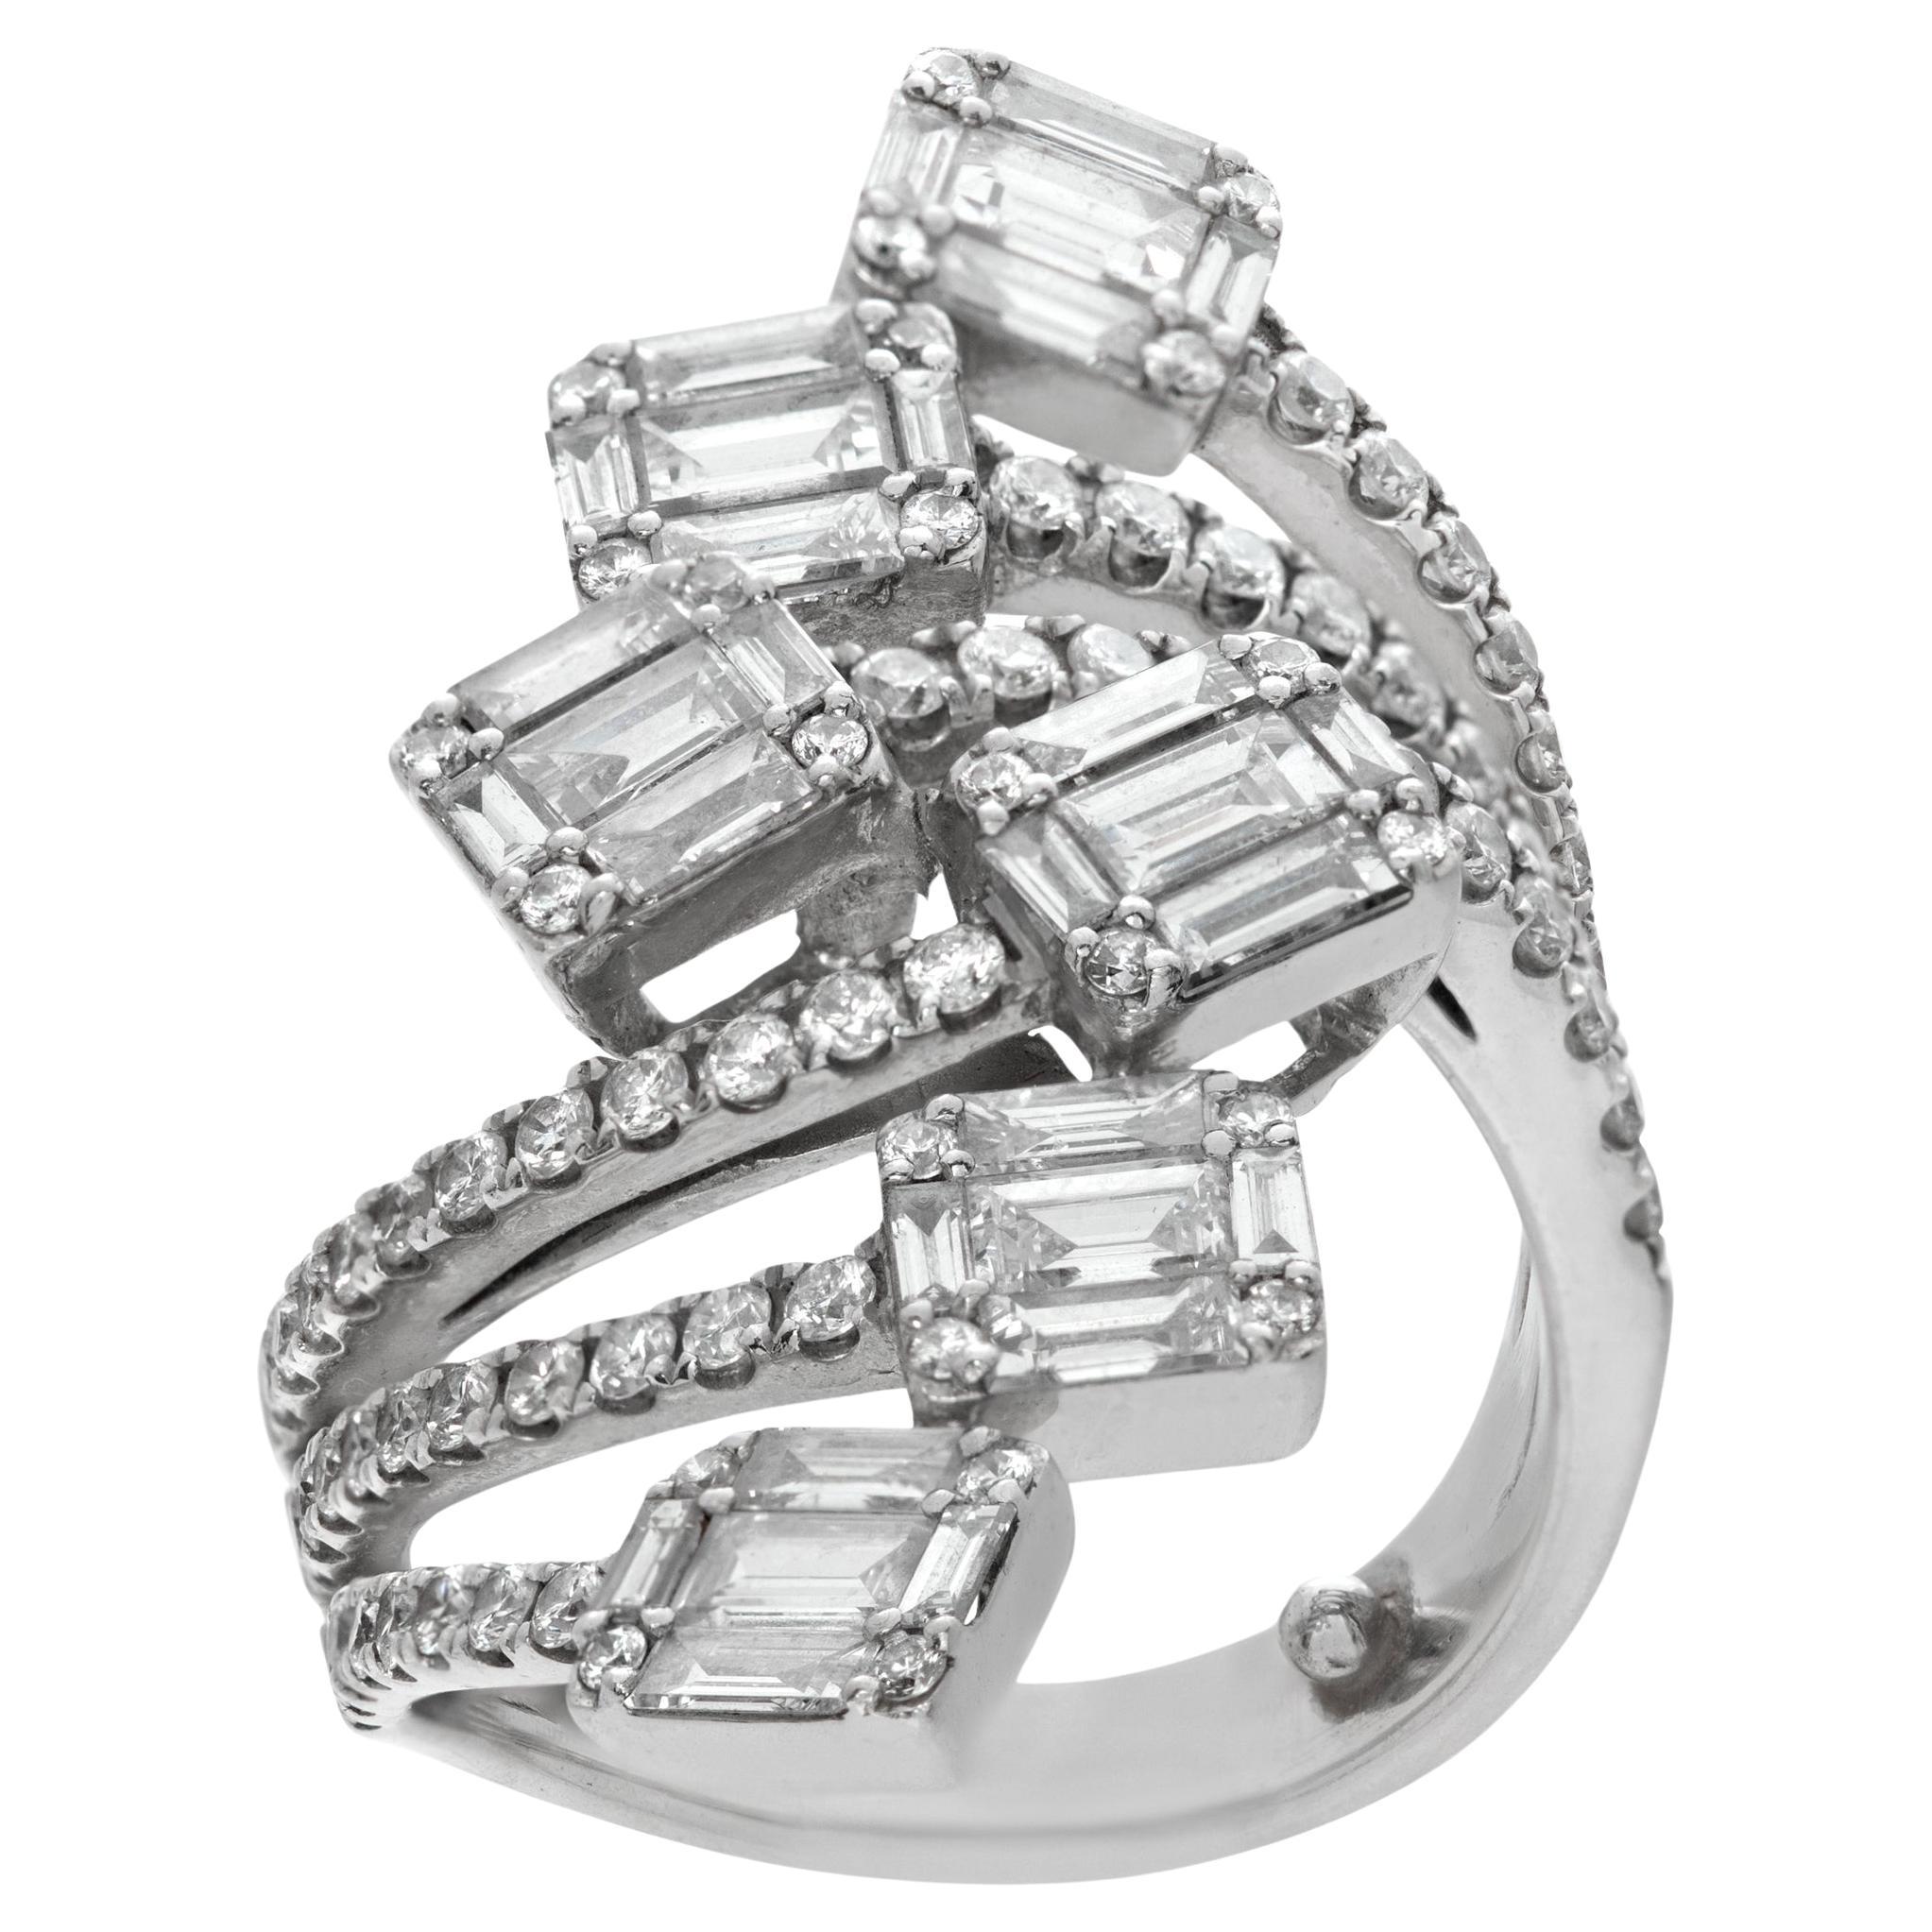 Illusion baguettes & round brilliant cut diamonds ring in white gold For Sale